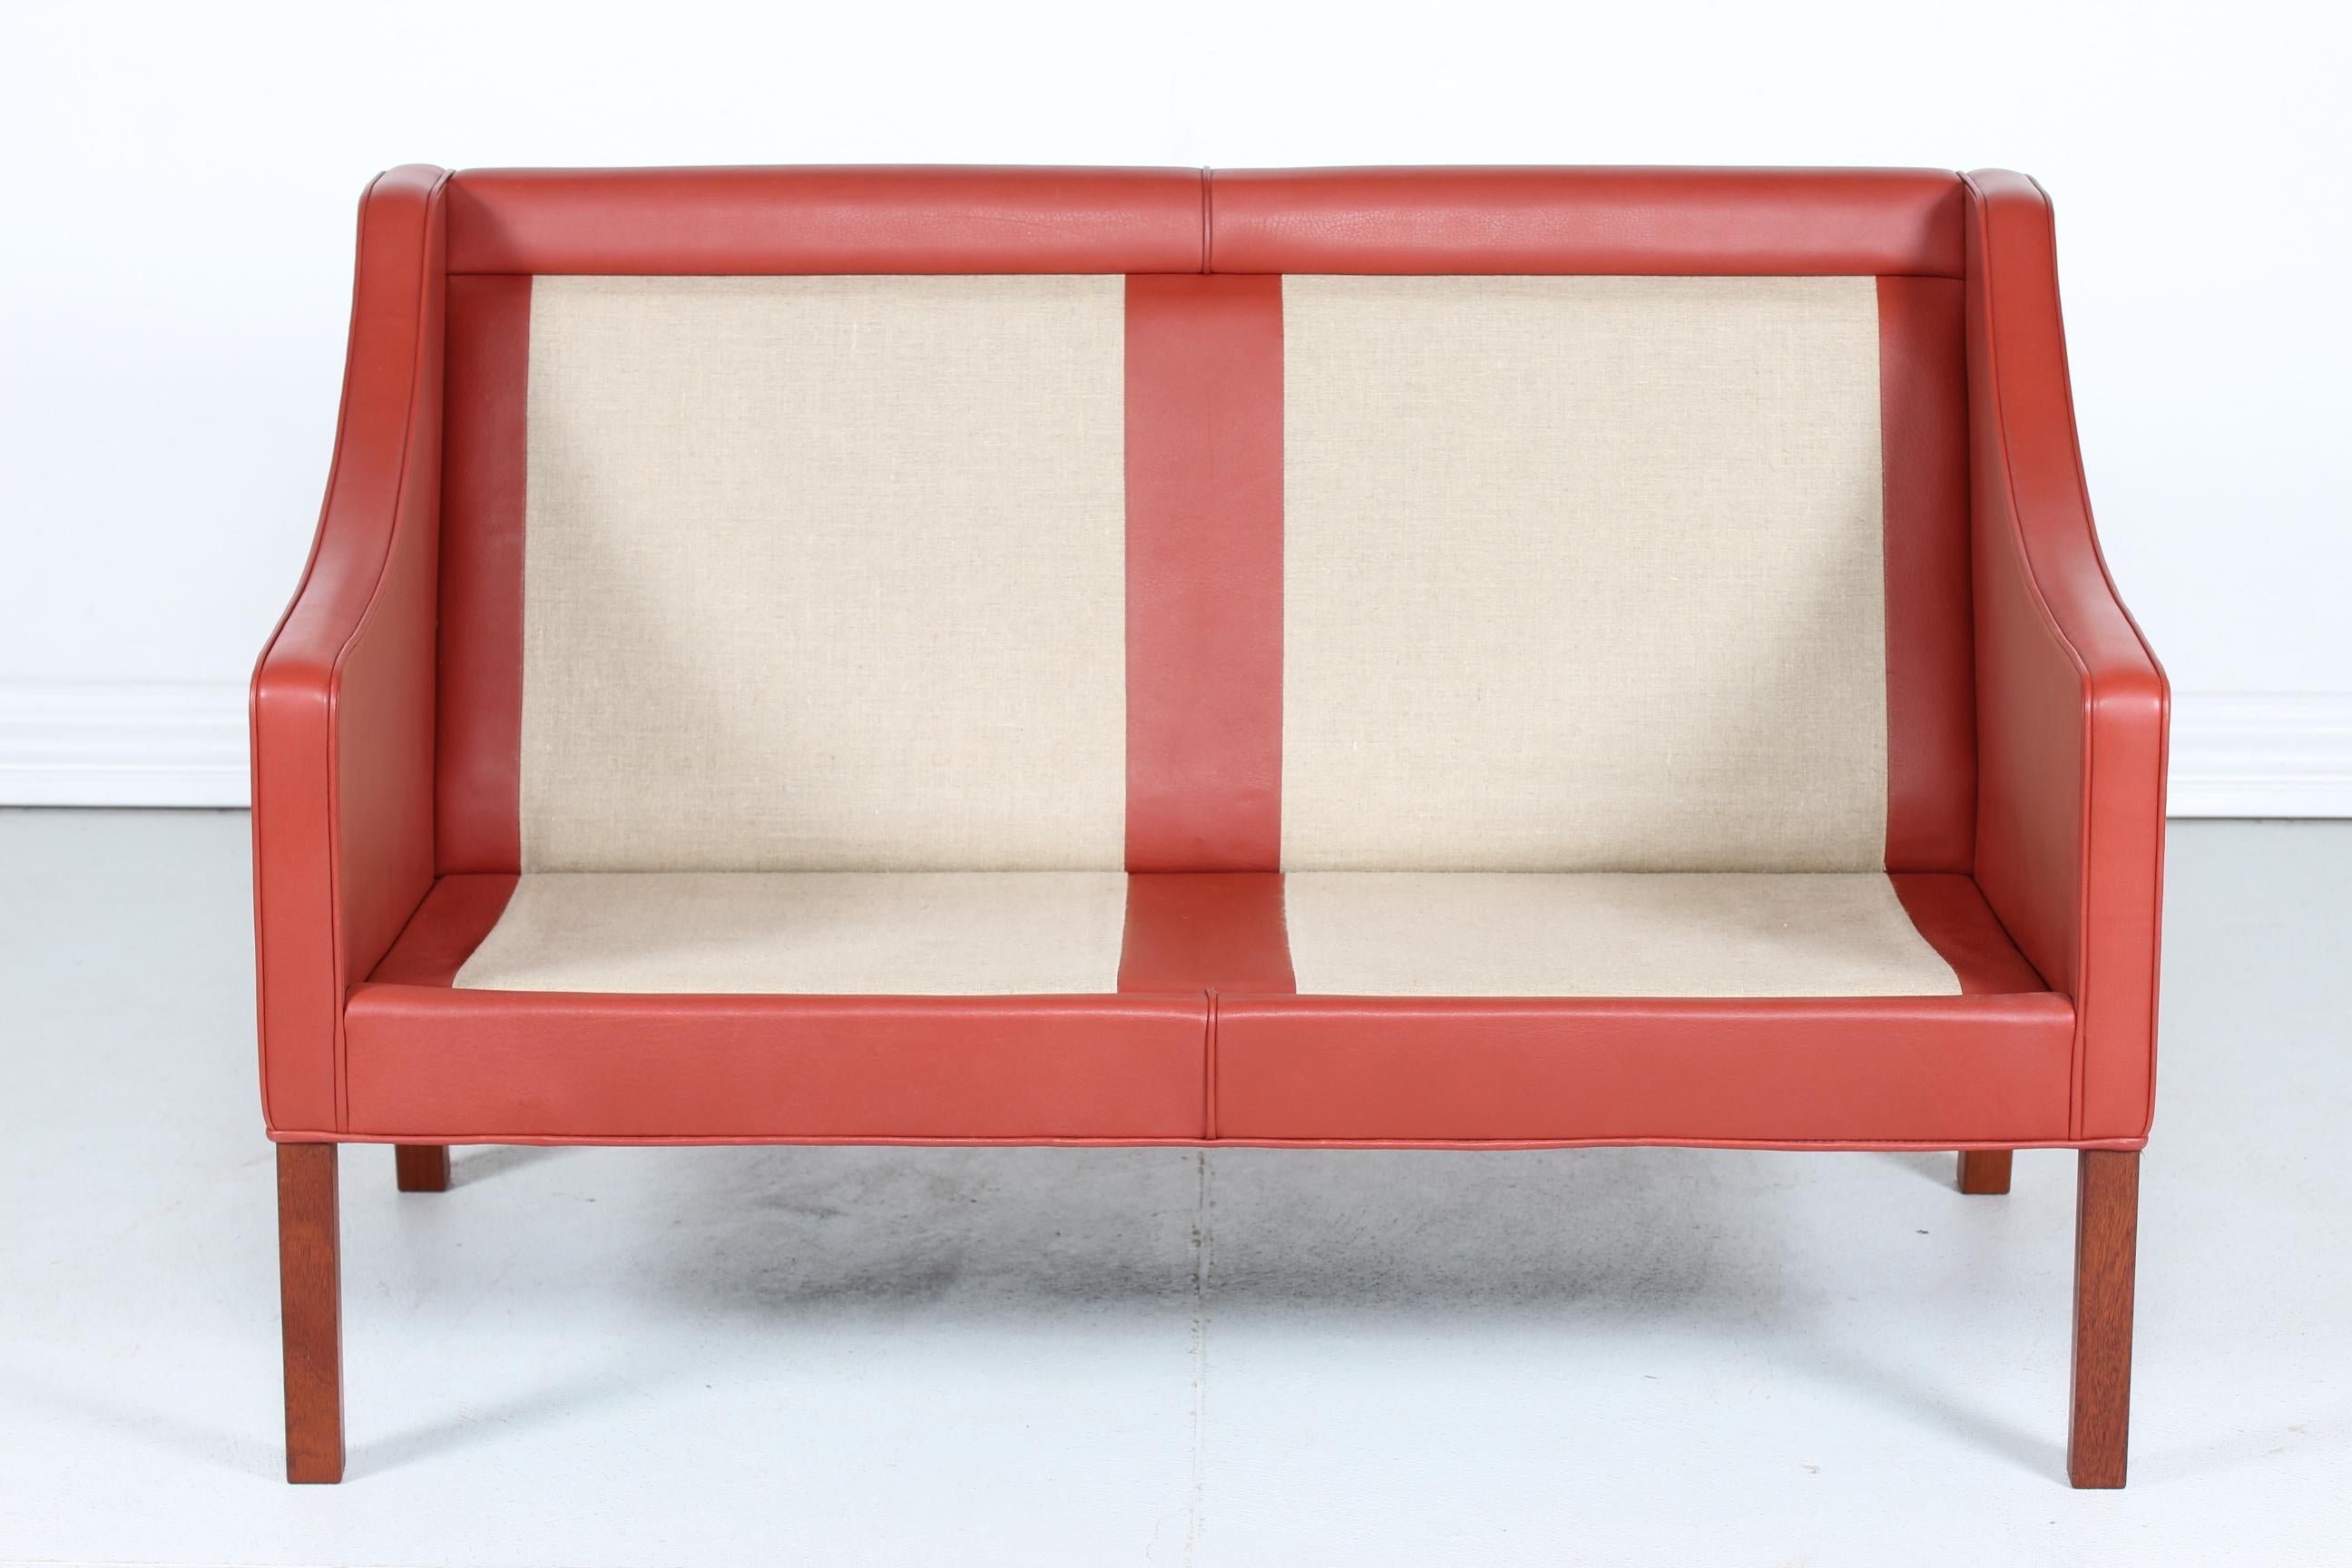 Late 20th Century Børge Mogensen Sofa 2208 with Red Brown Leather by Fredericia Stolefabrik